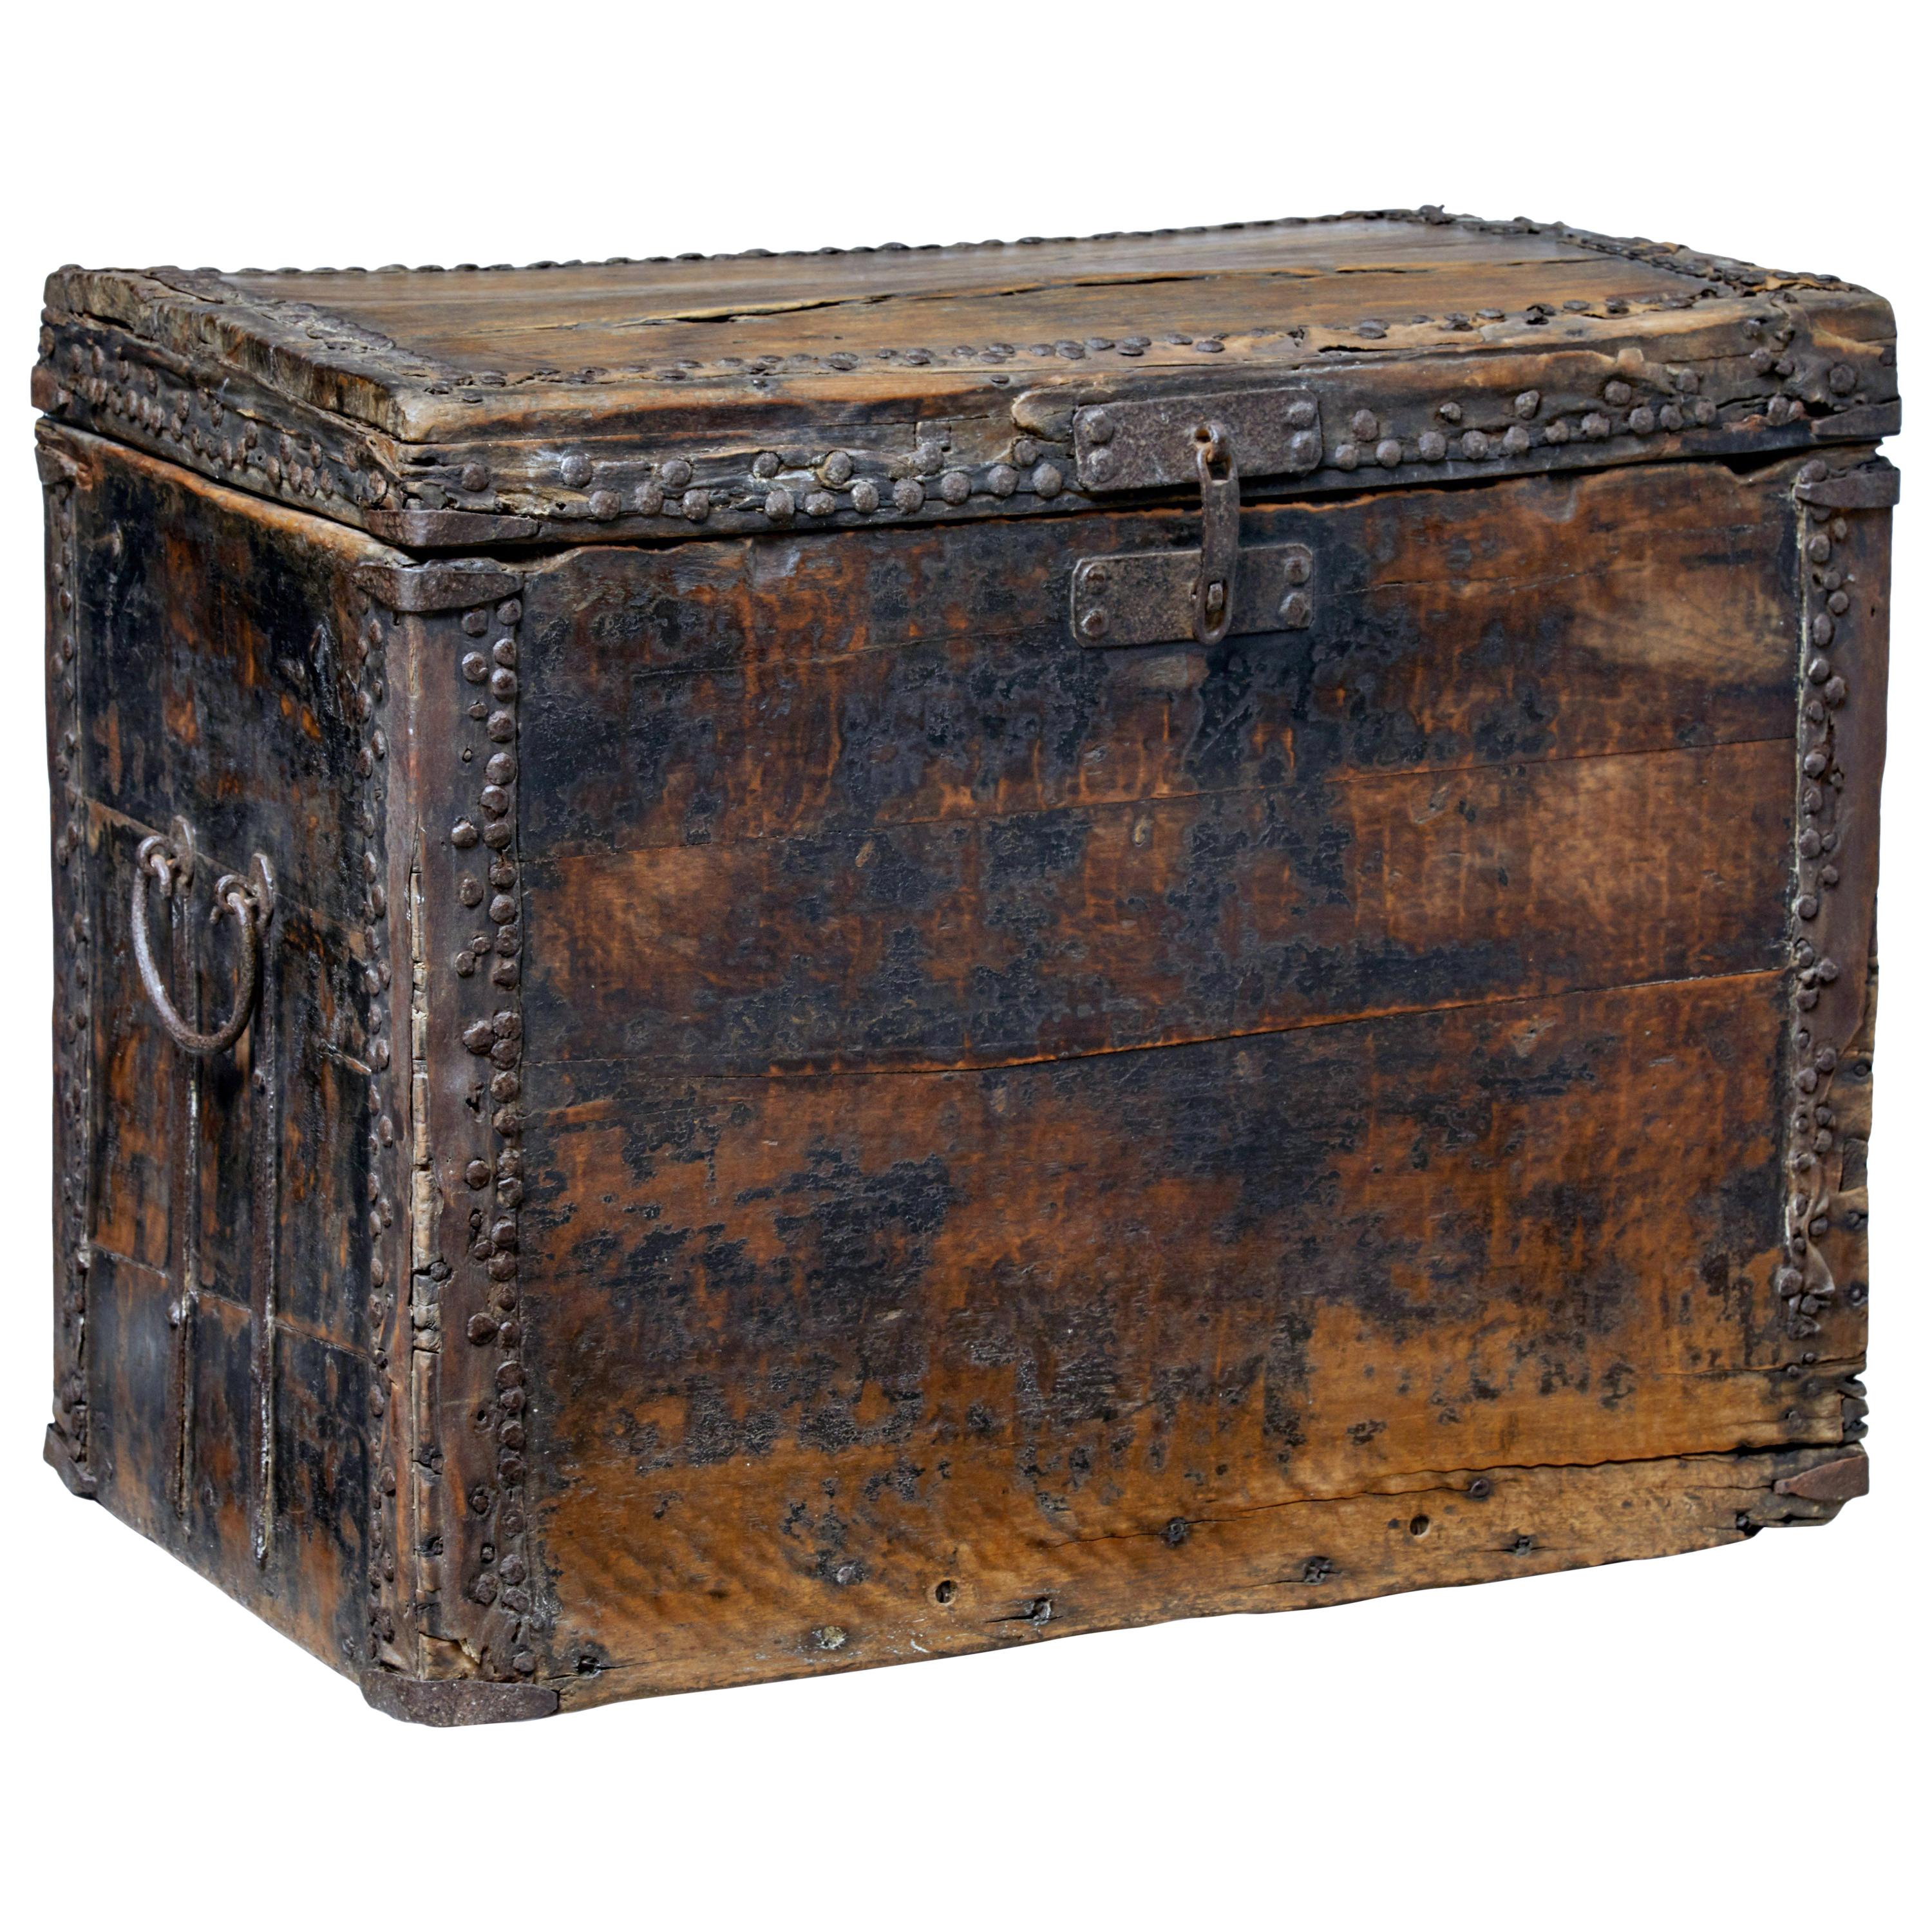 18th Century Chinese Hard Wood Coffer Chest